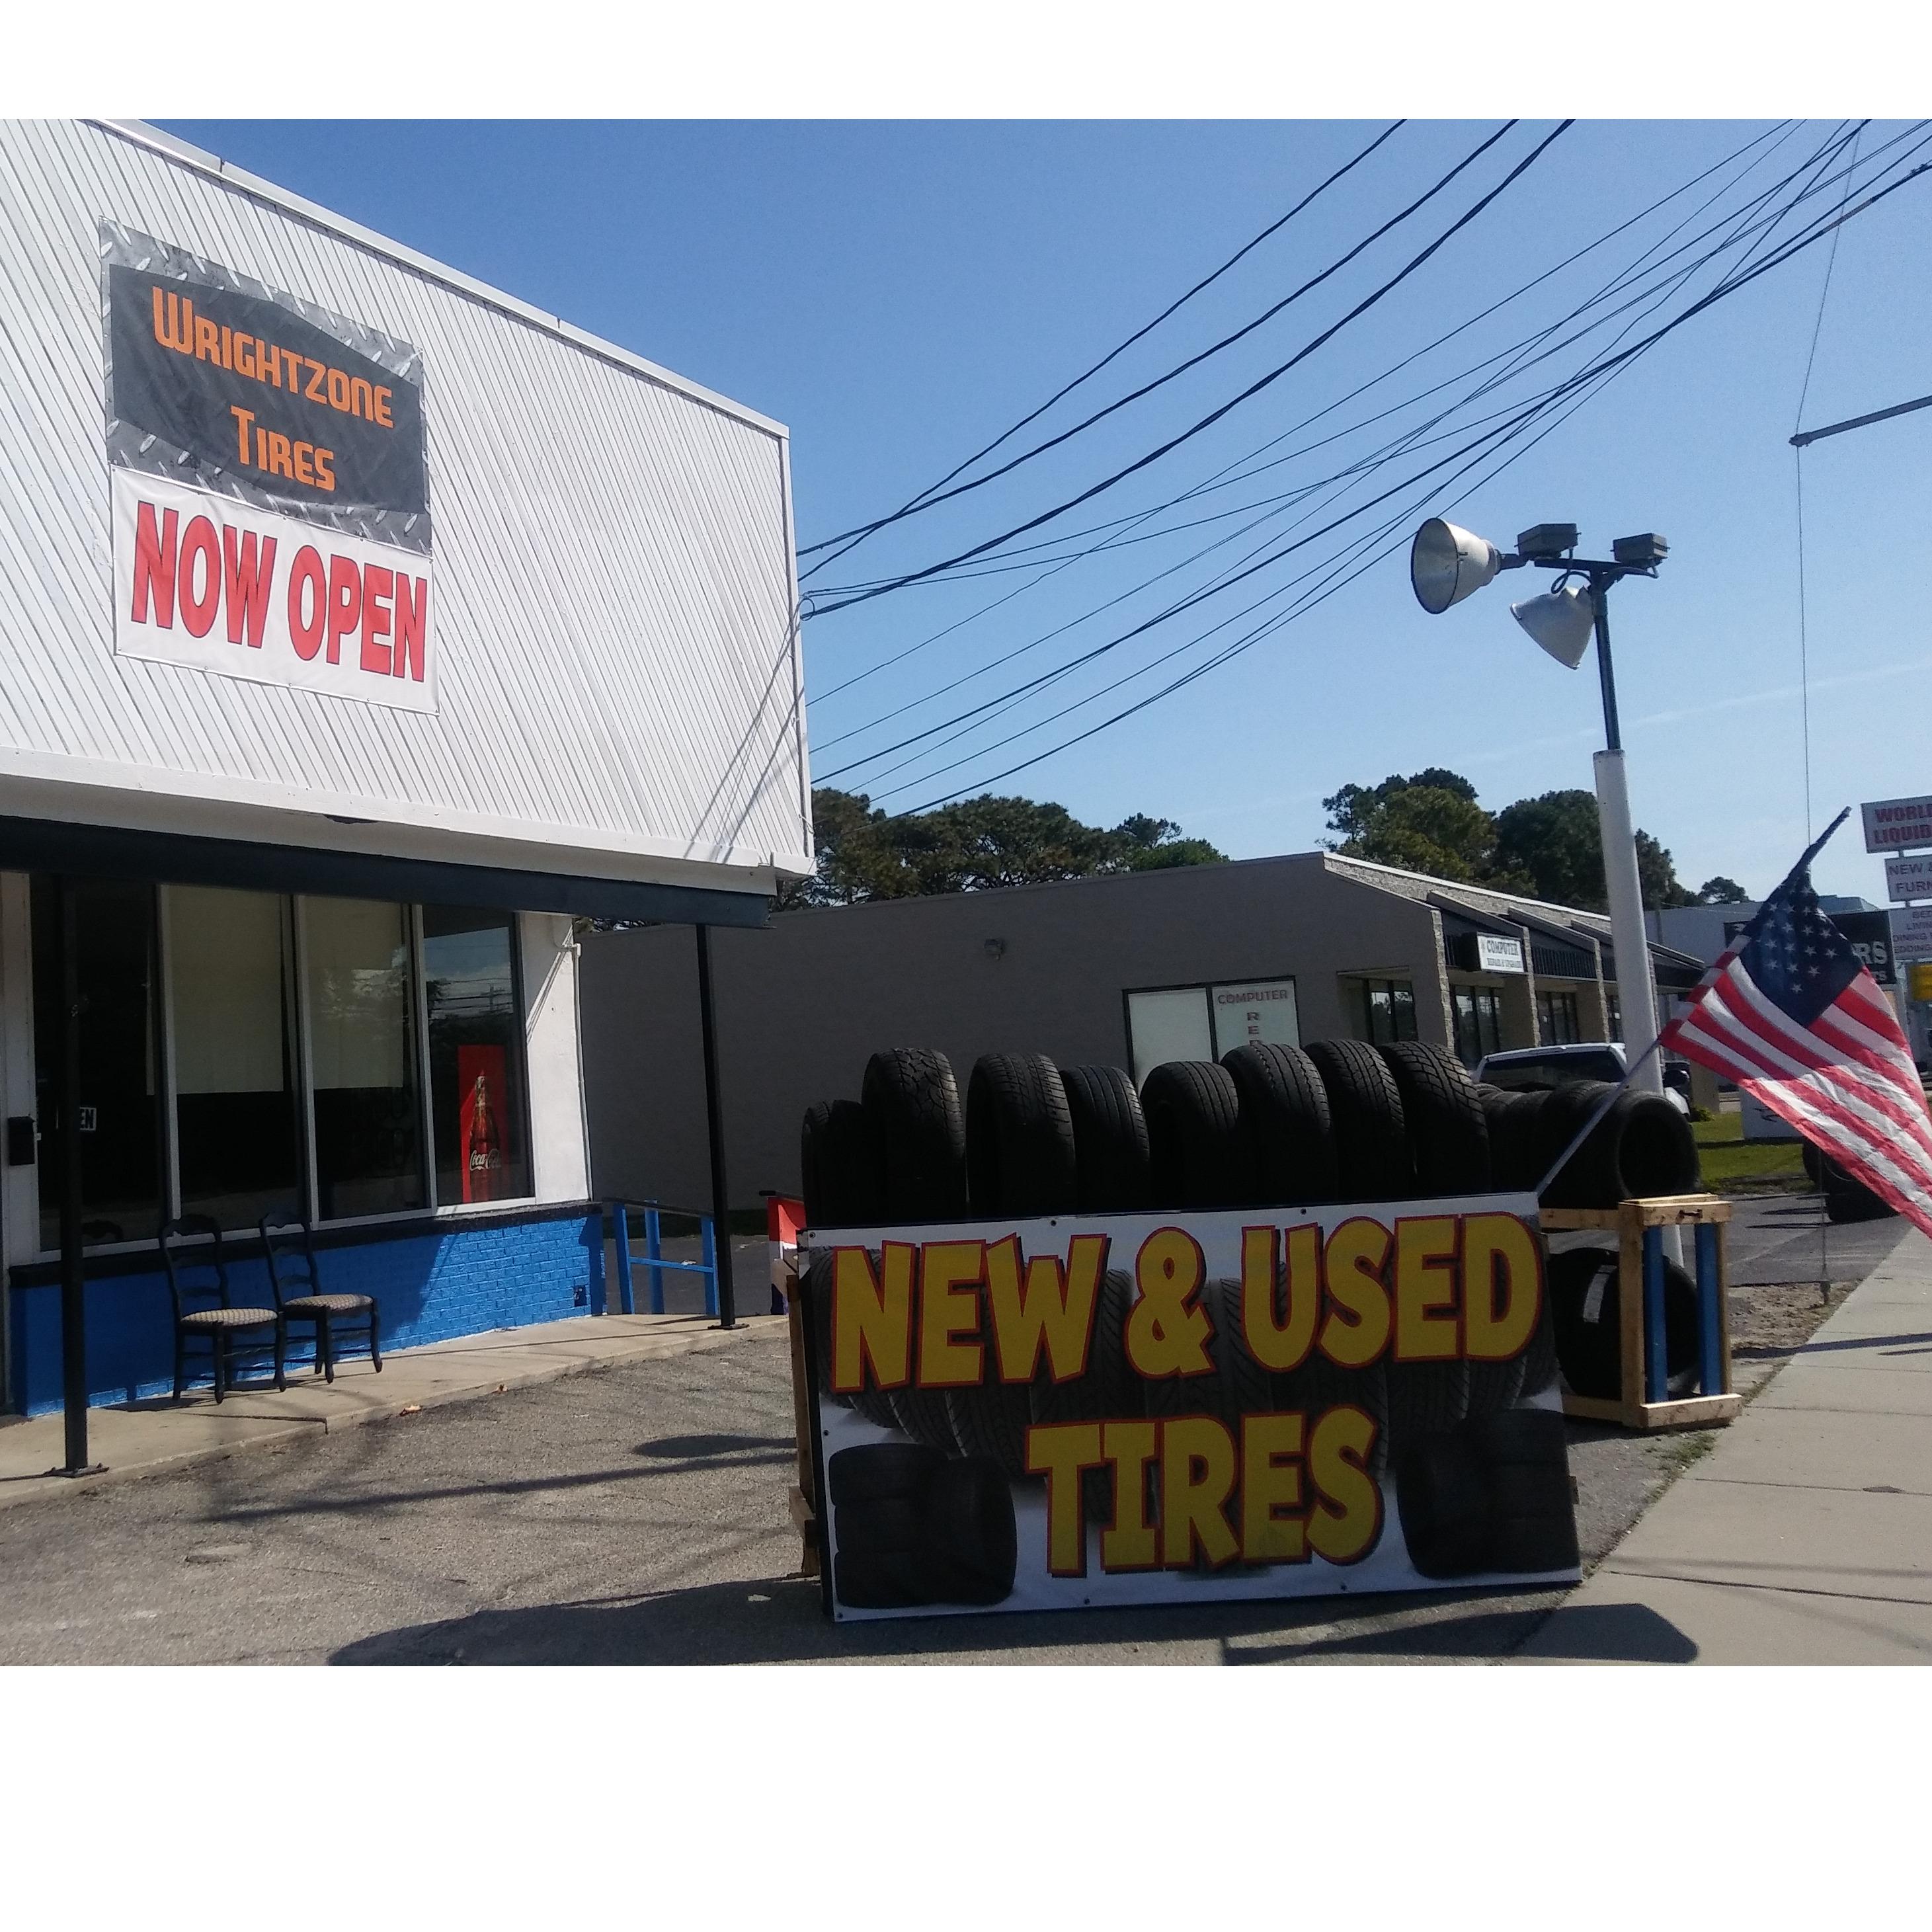 Wrightzone Tires Coupons near me in North Myrtle Beach | 8coupons